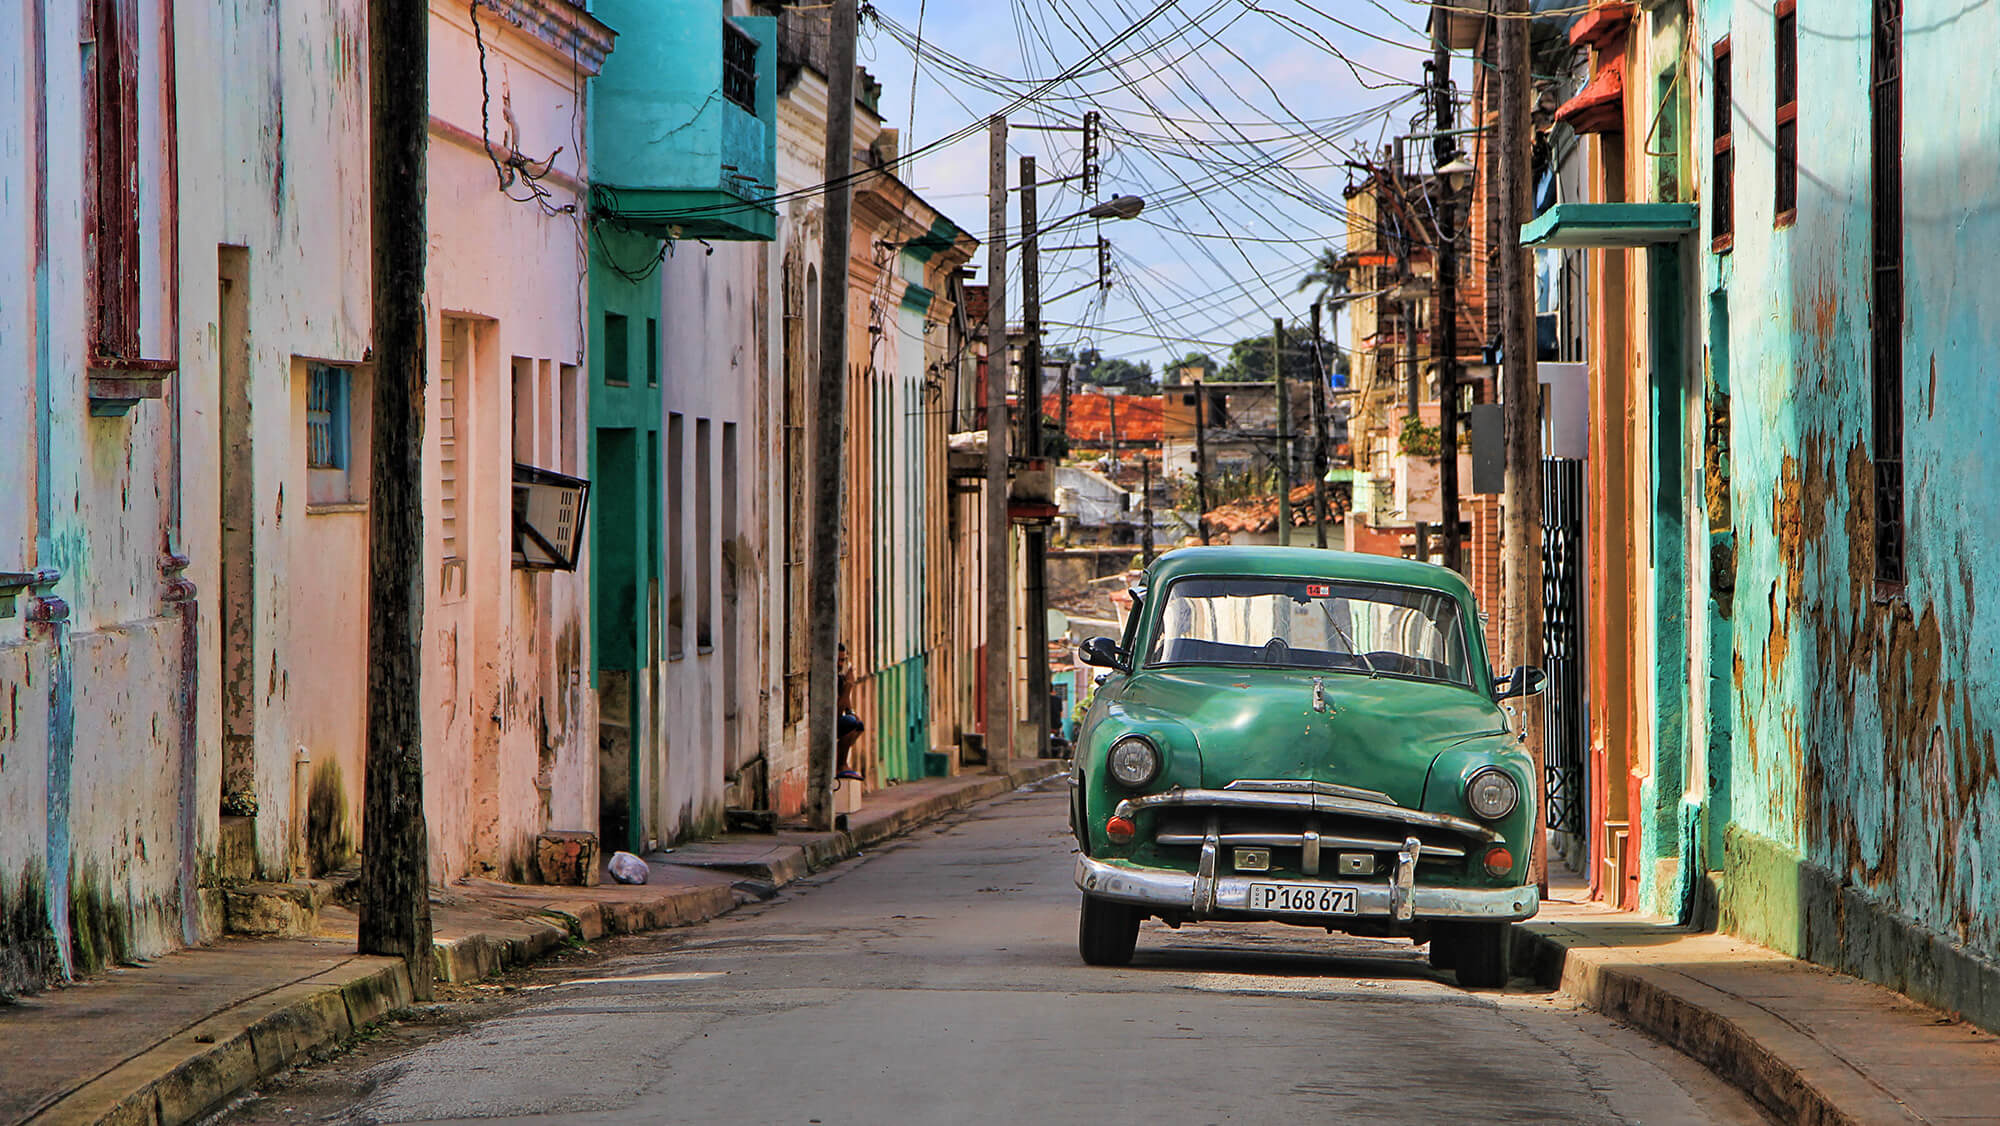 Cuban Streets with a Green Old Fashioned Car